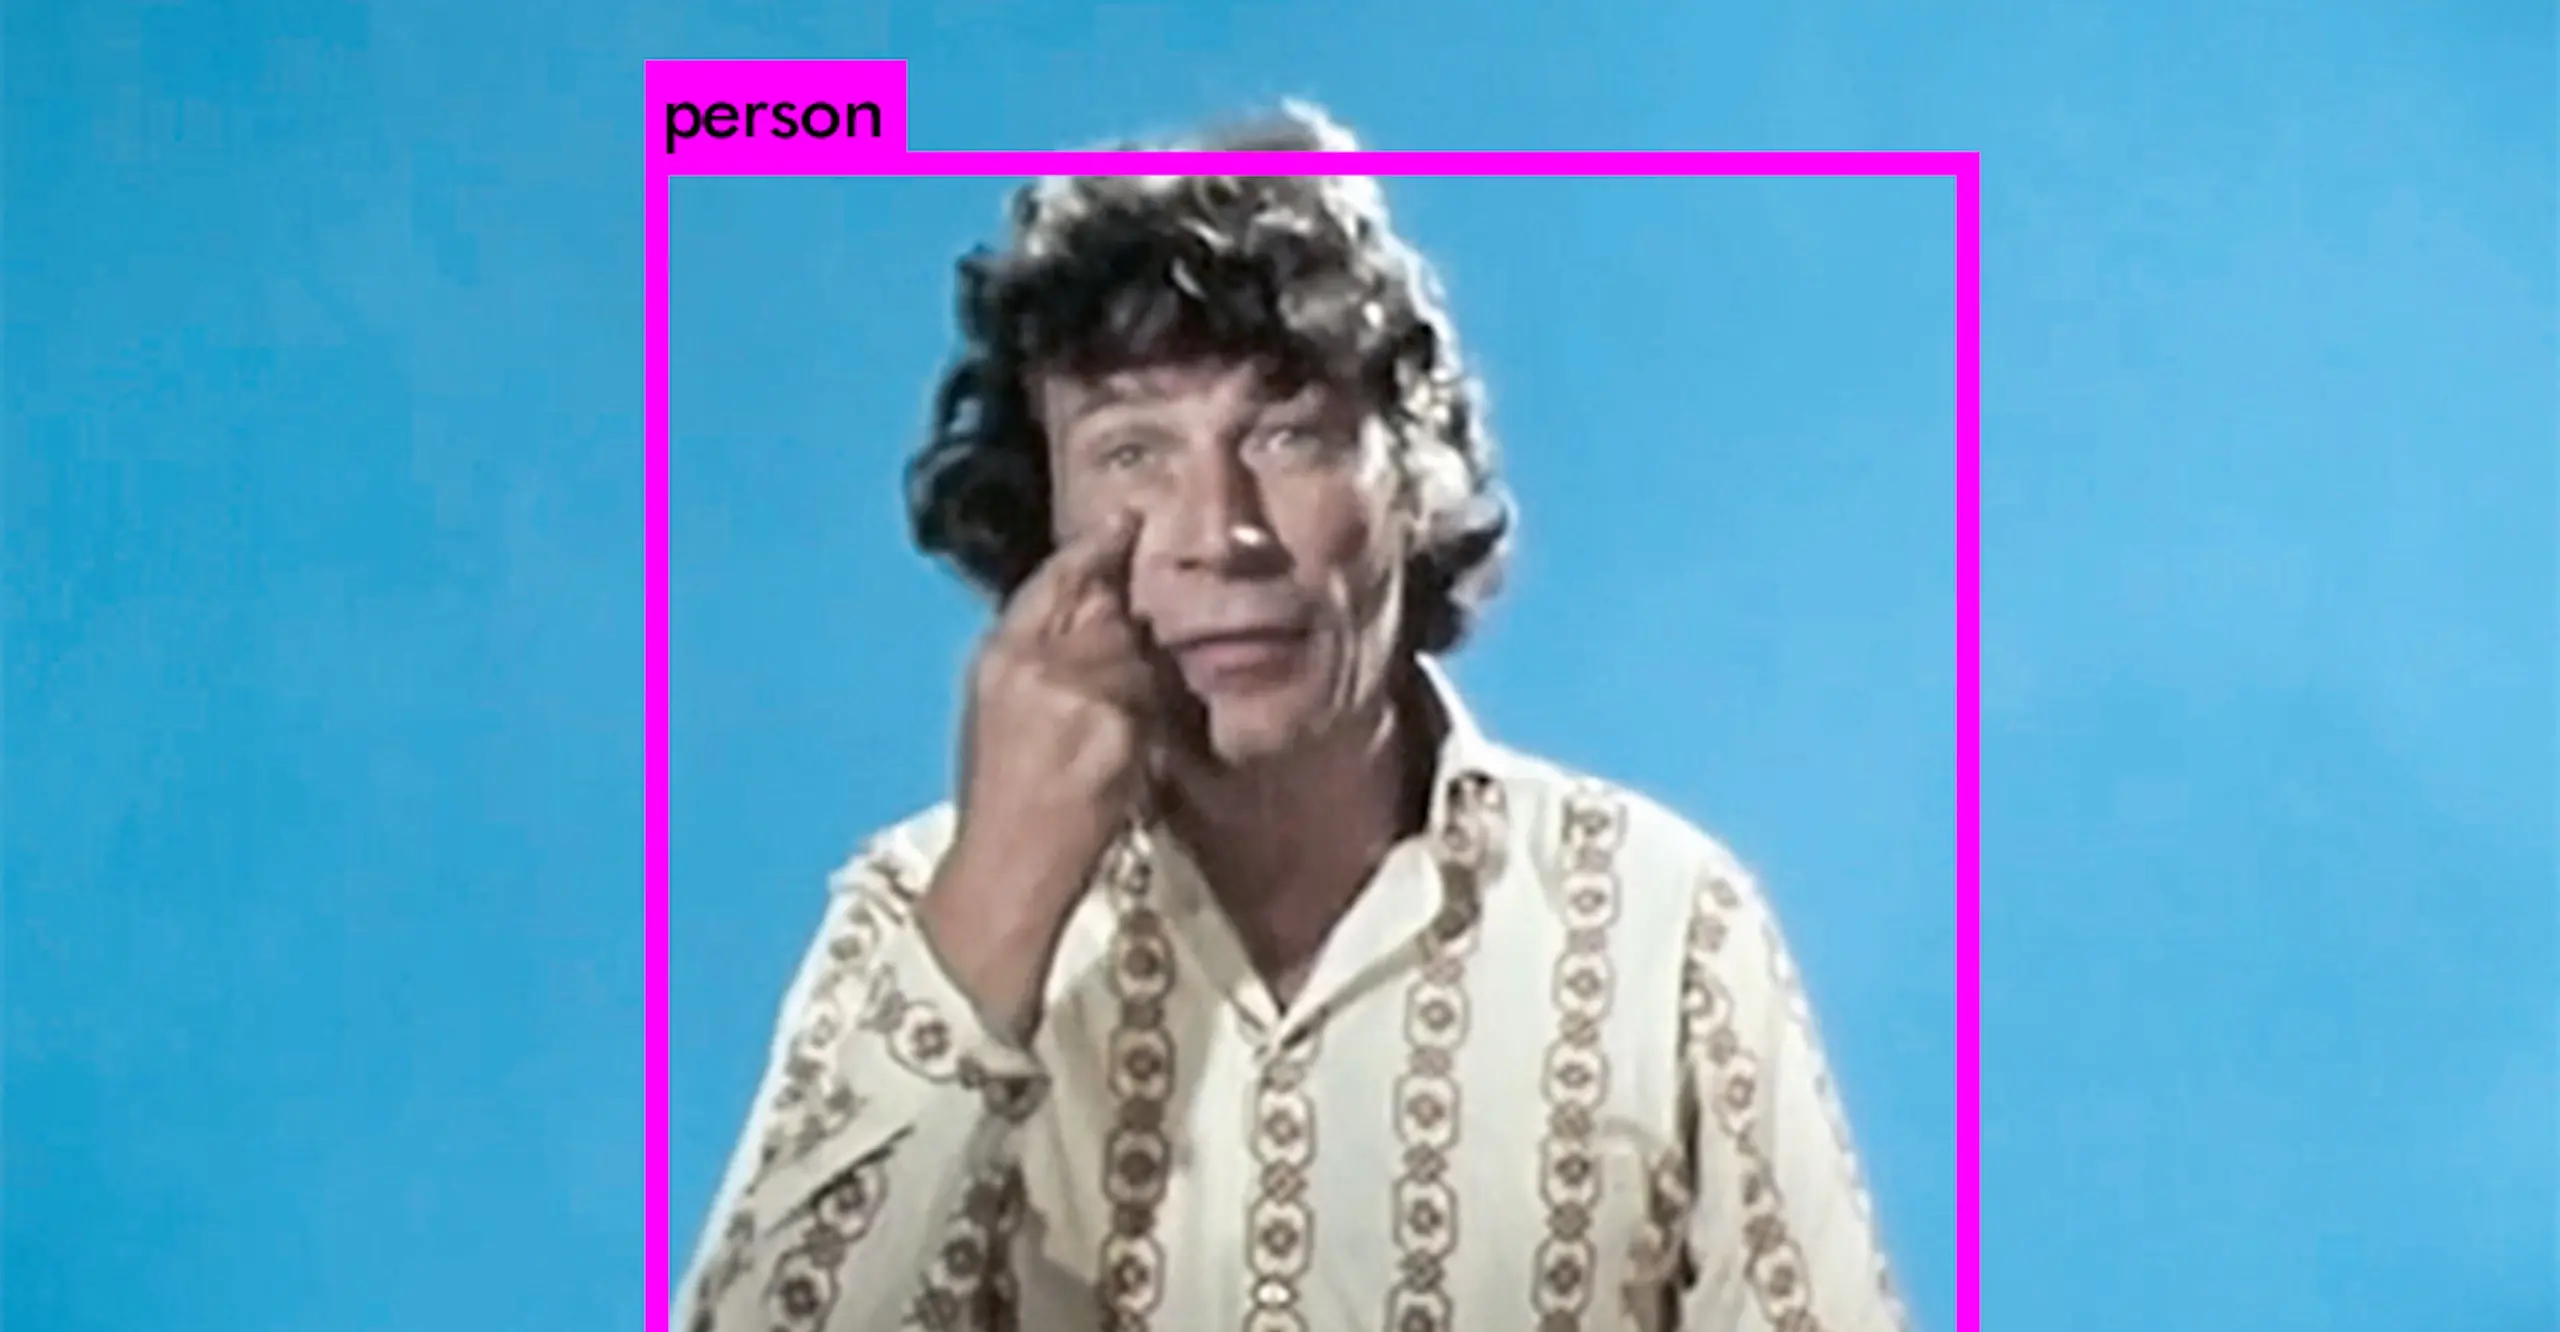 A person in front of a bright blue screen points at their eye, their head and shoulders are framed by a pink square with the word 'person' written at the top.